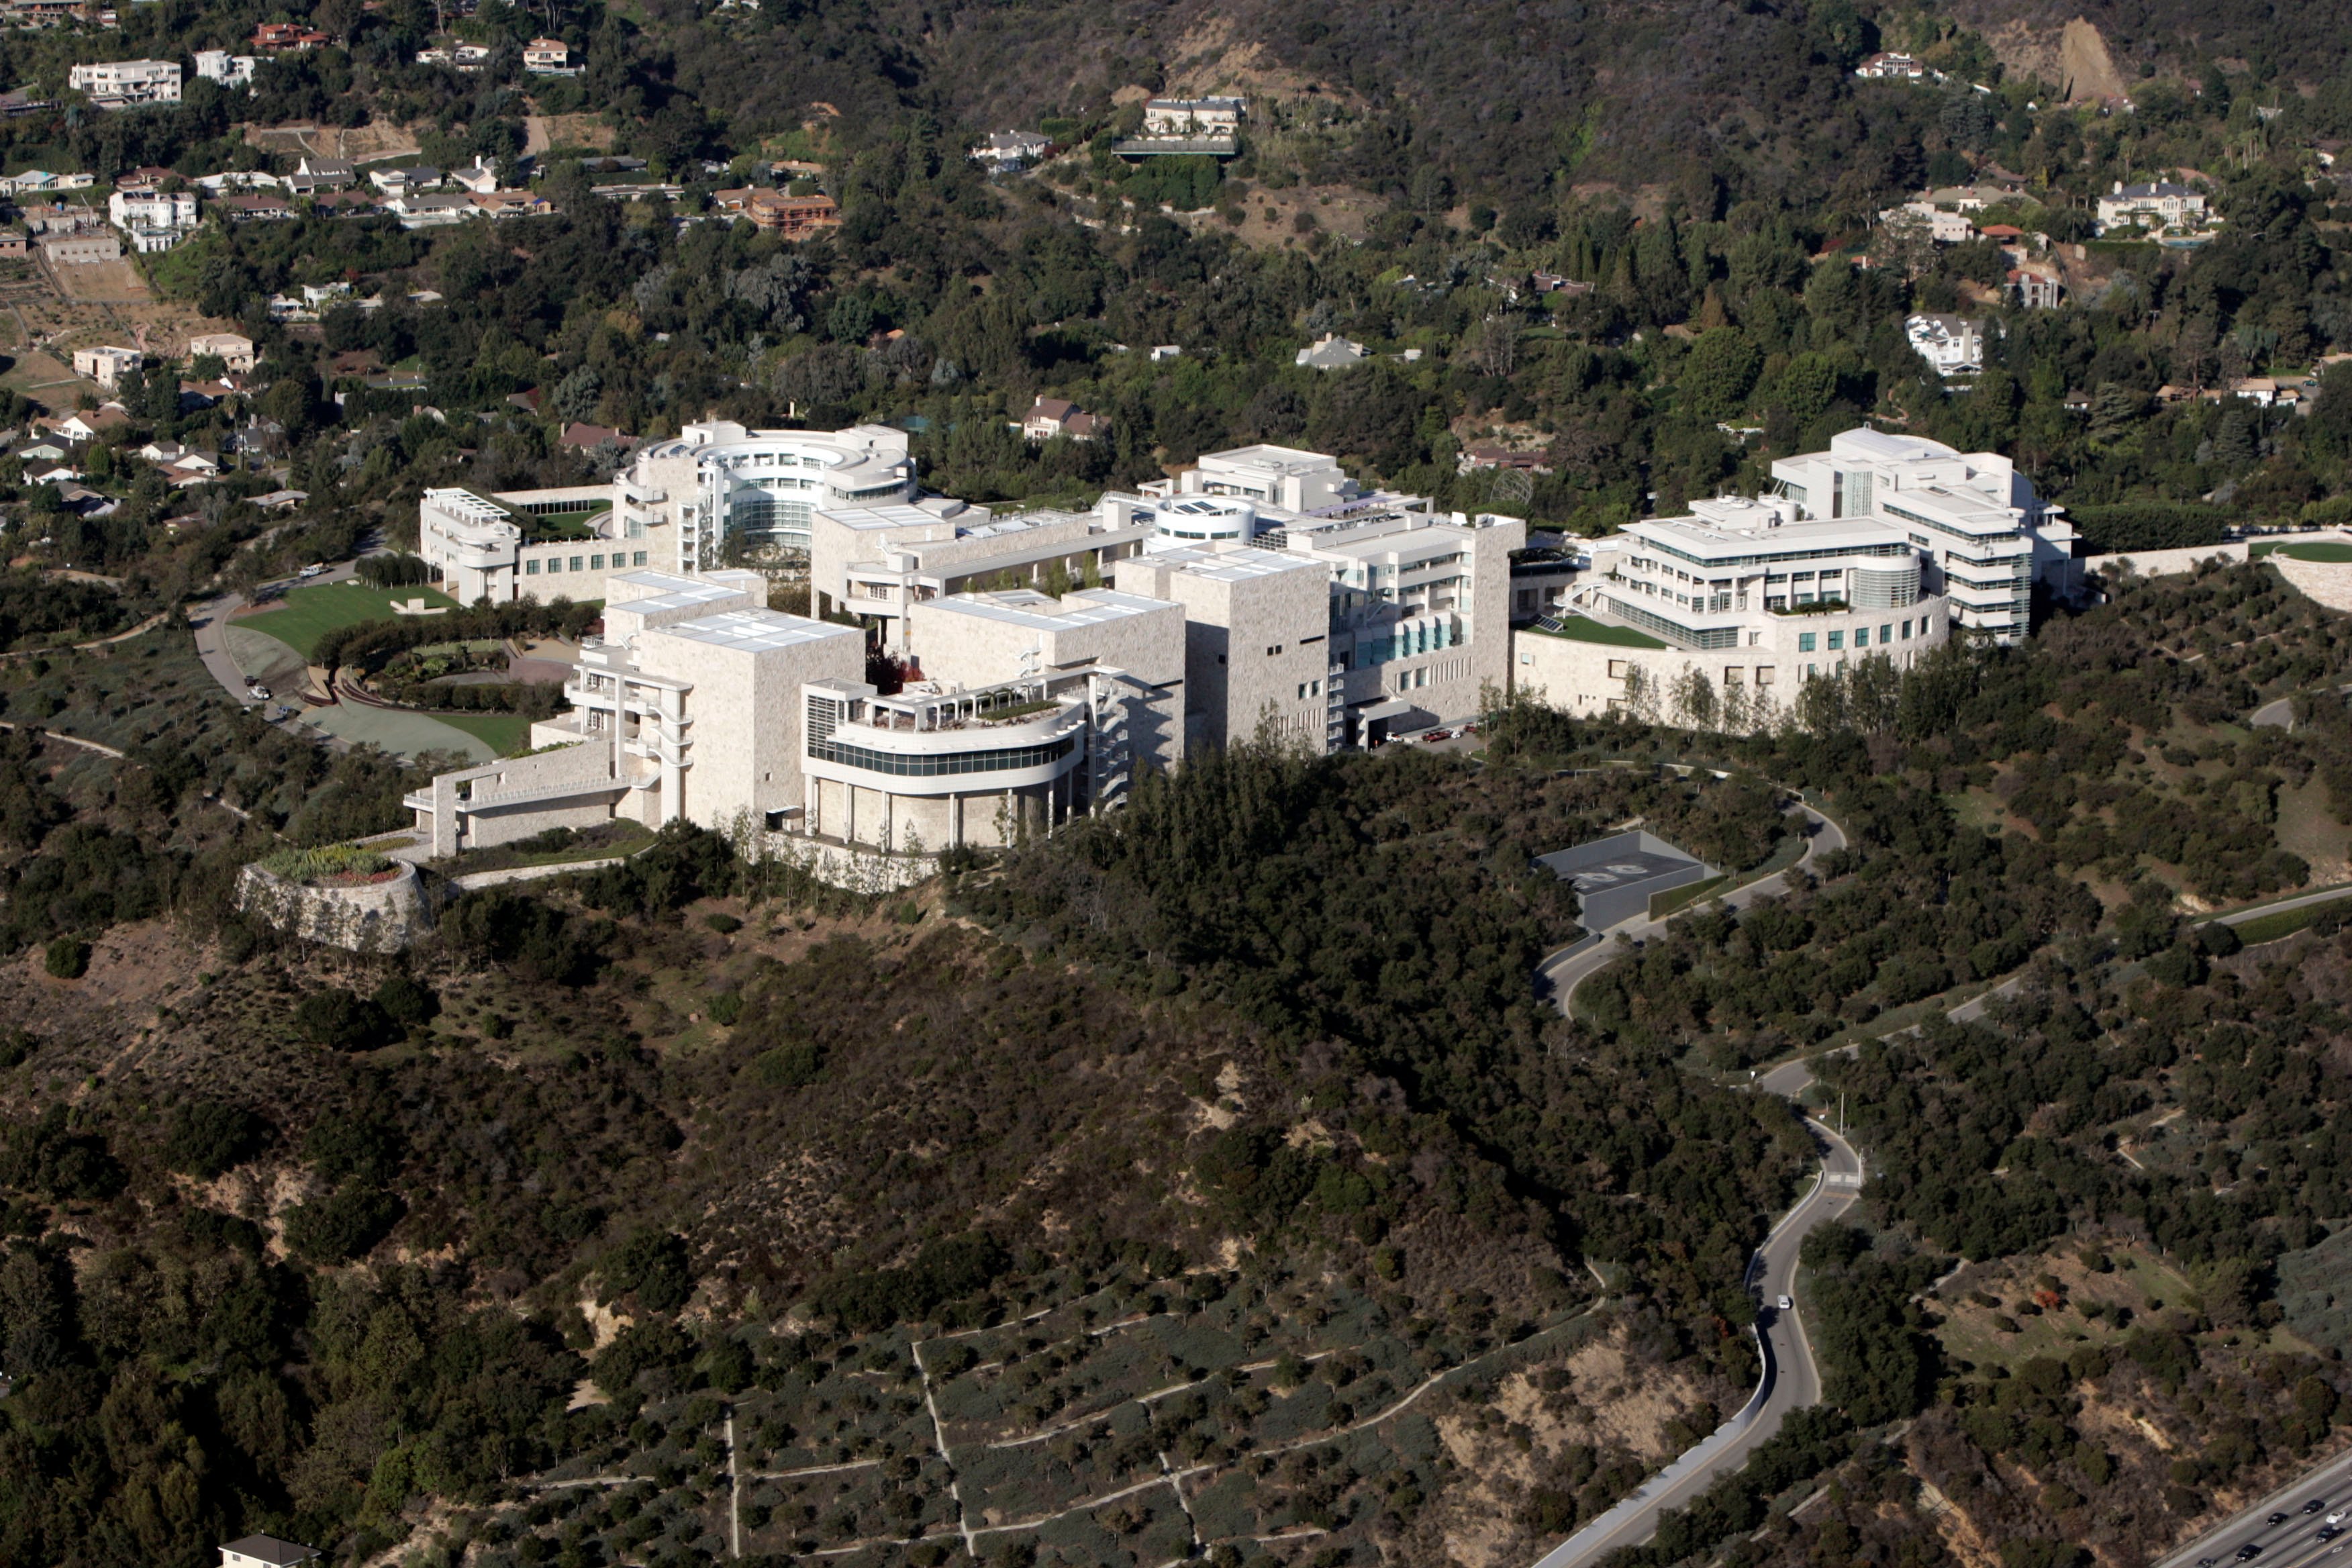 The Getty, Skirball Cultural Center Close As California Is 